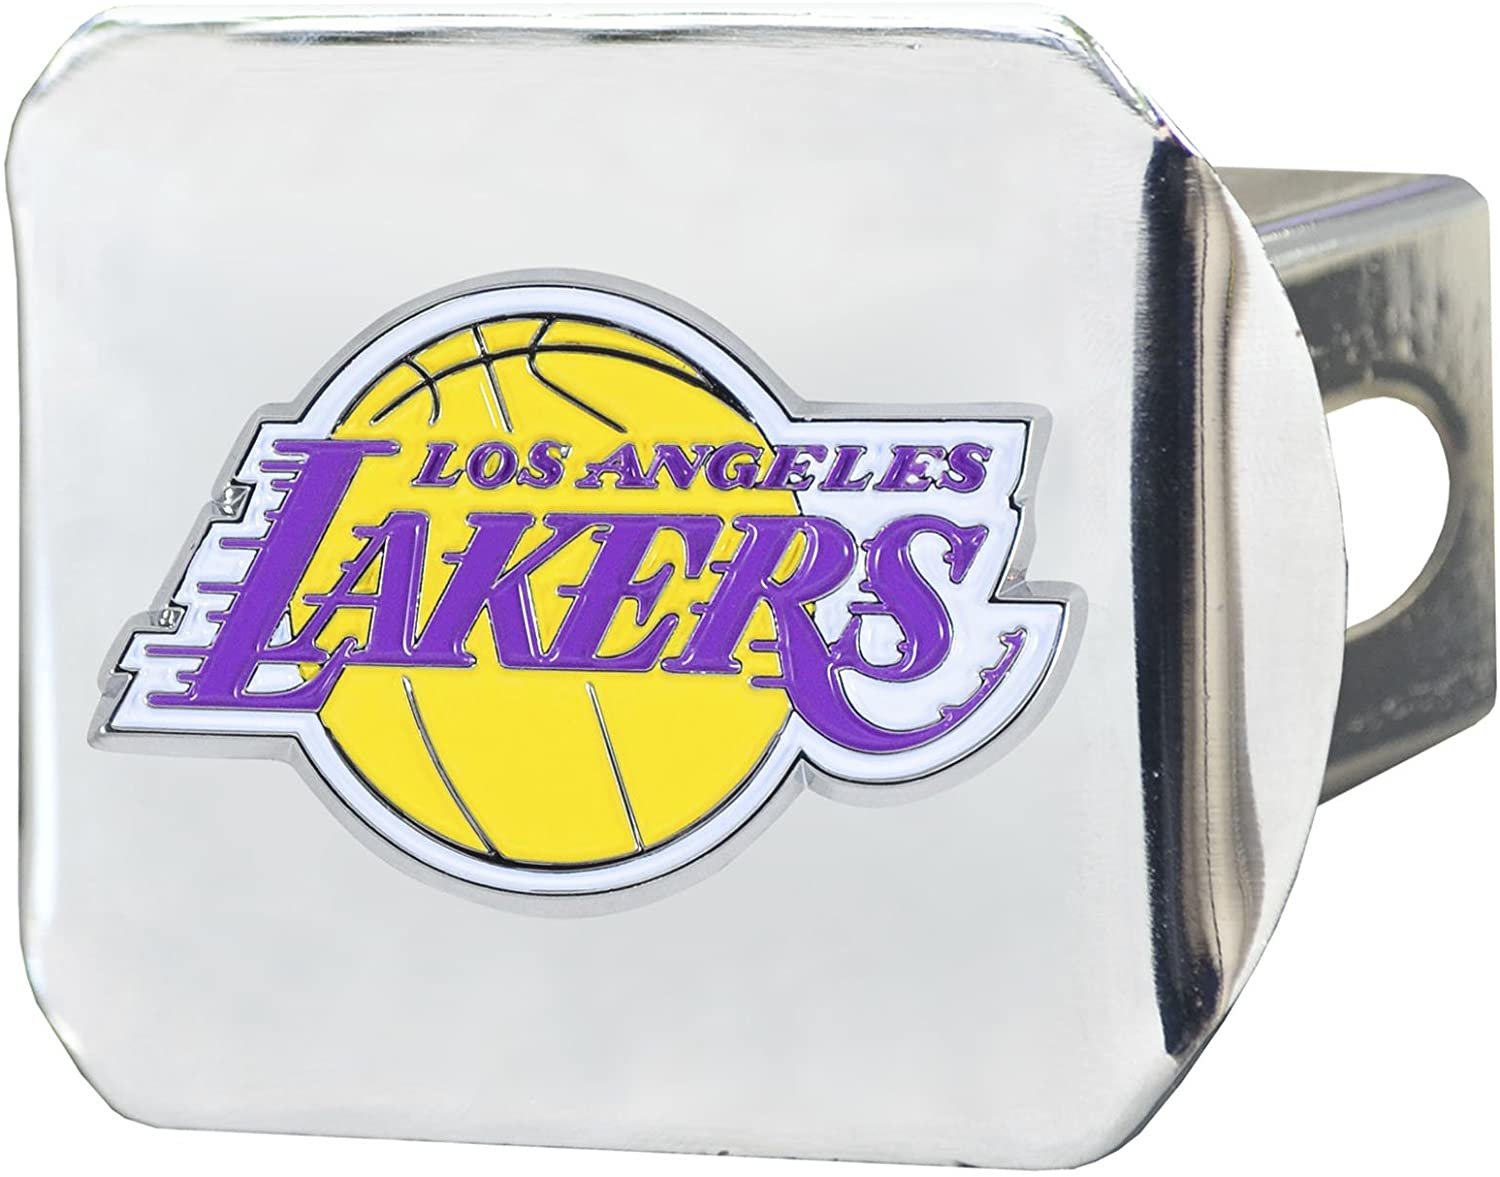 Los Angeles Lakers Hitch Cover Solid Metal with Raised Color Metal Emblem 2" Square Type III